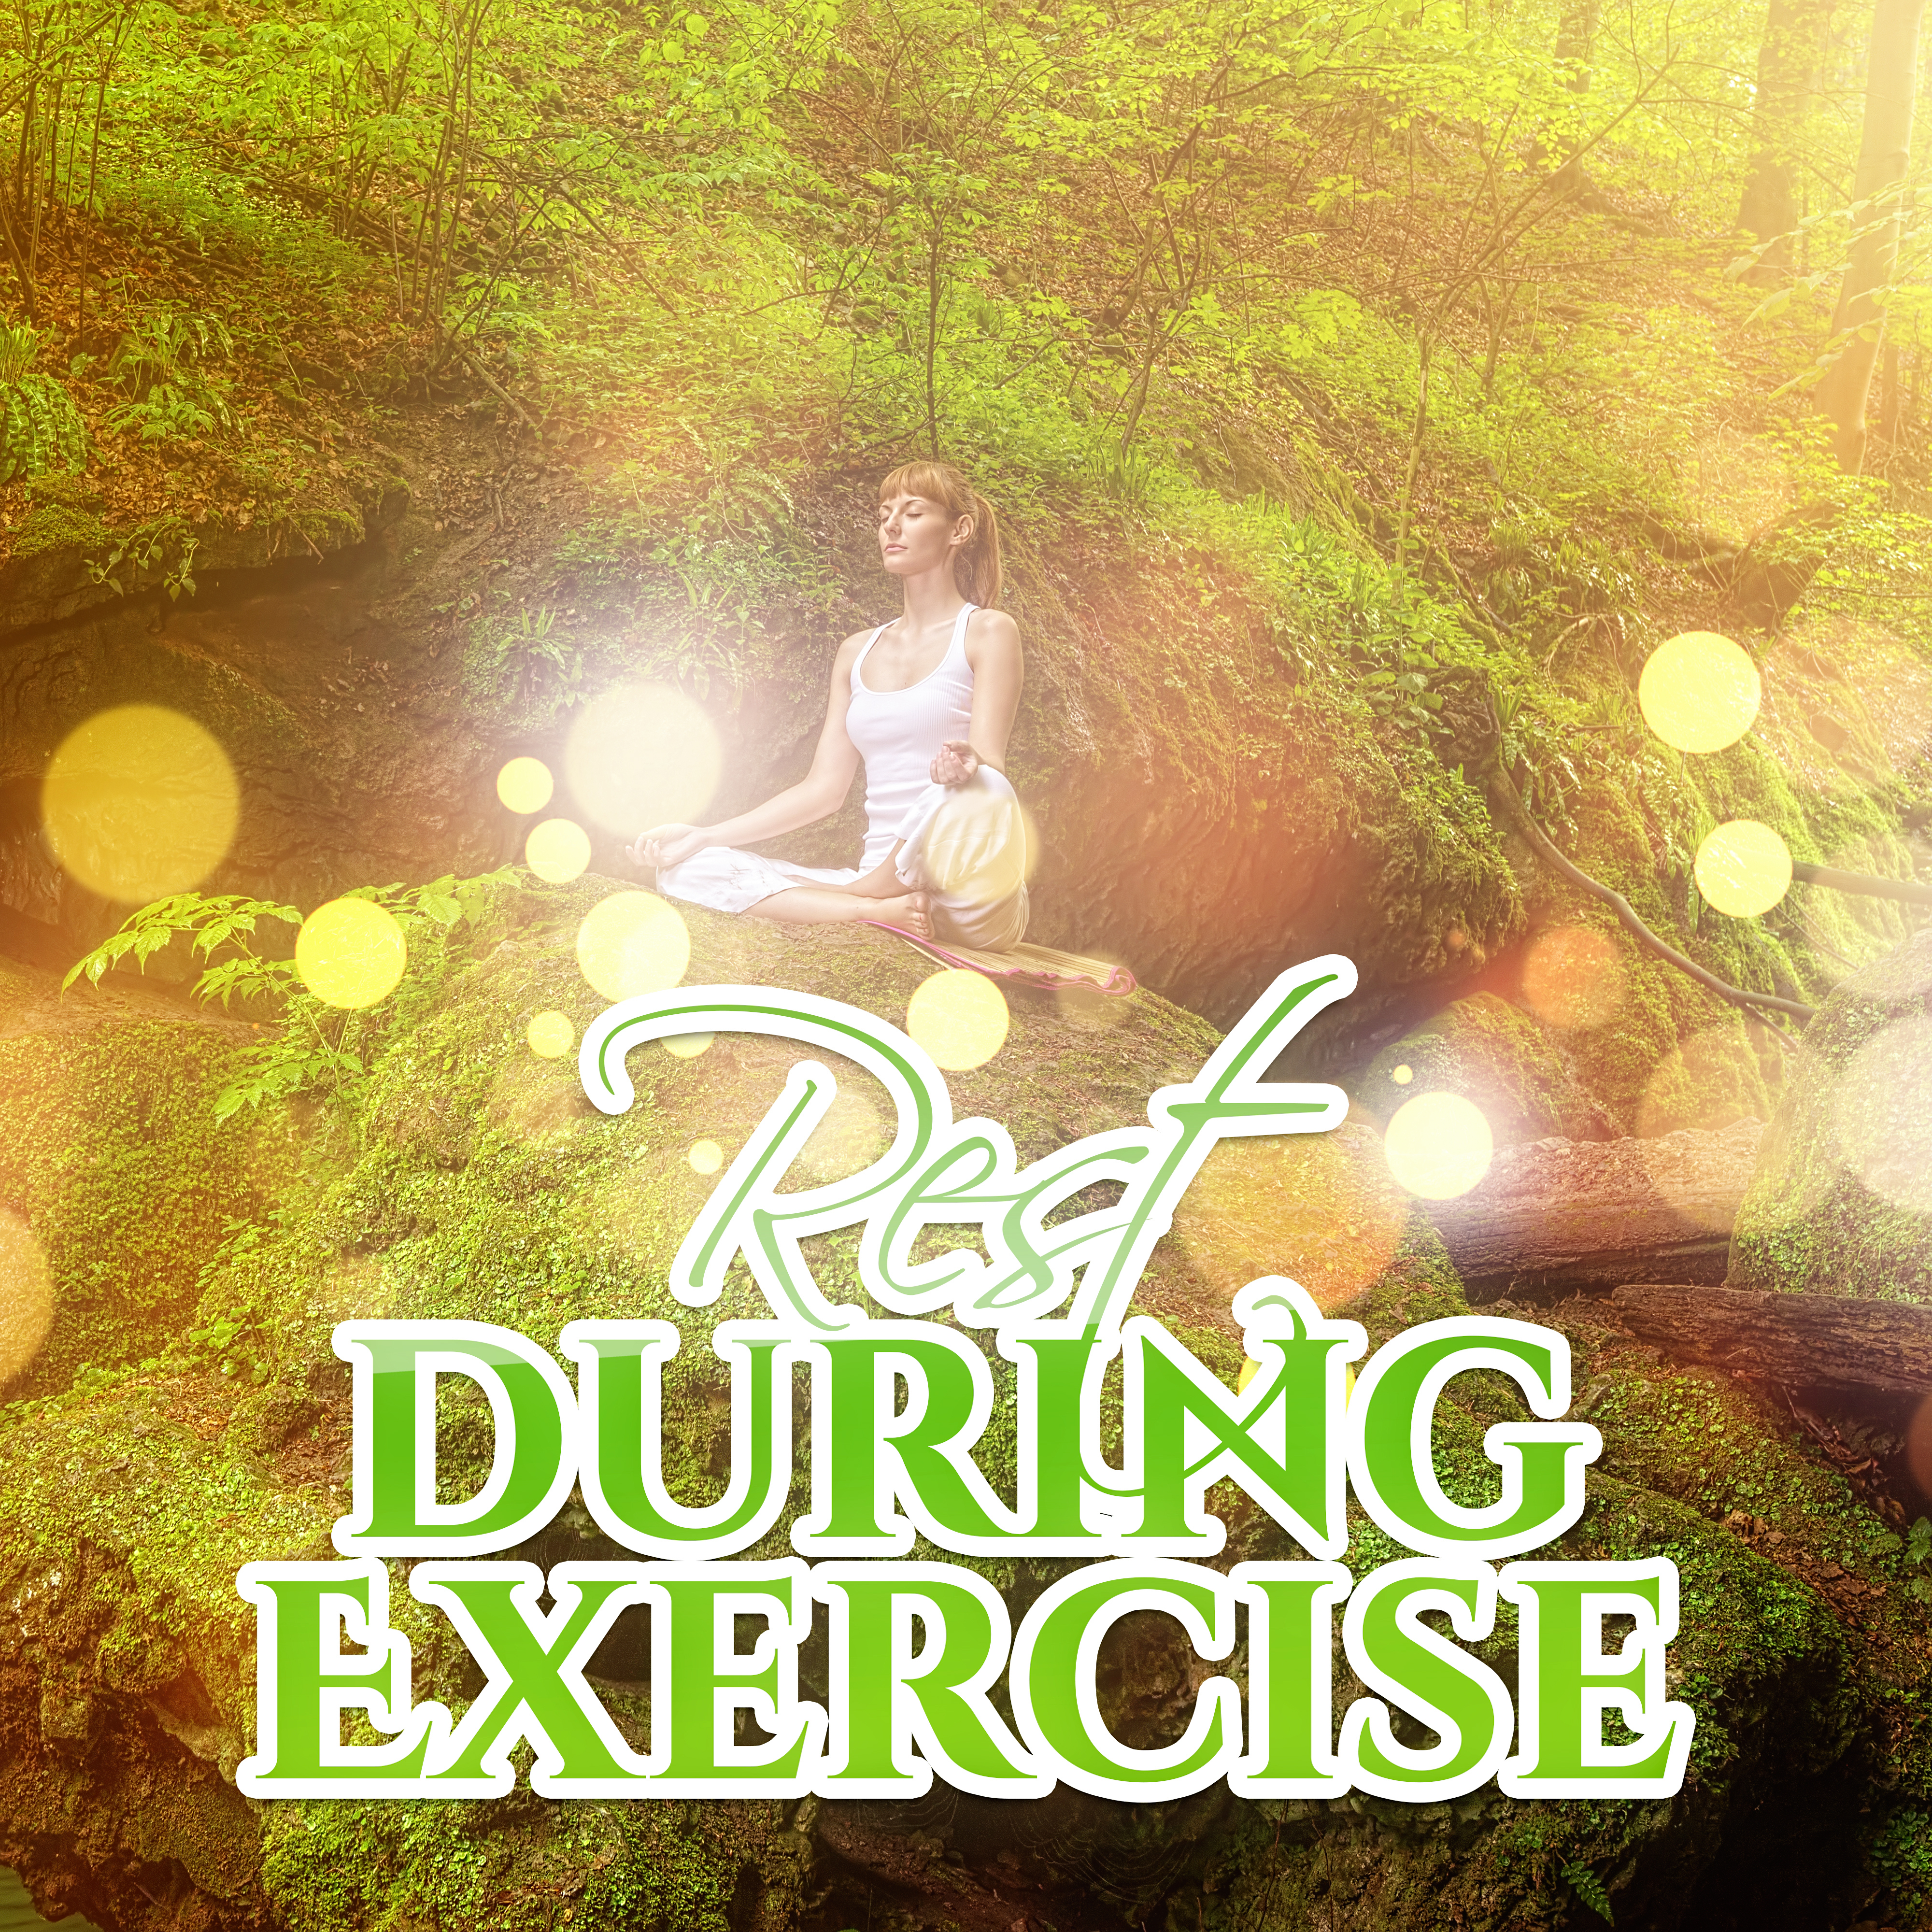 Rest during Exercise - Cool Fun, Exercises for Health, Relaxation of Body, Mind Mute, Communing with Nature